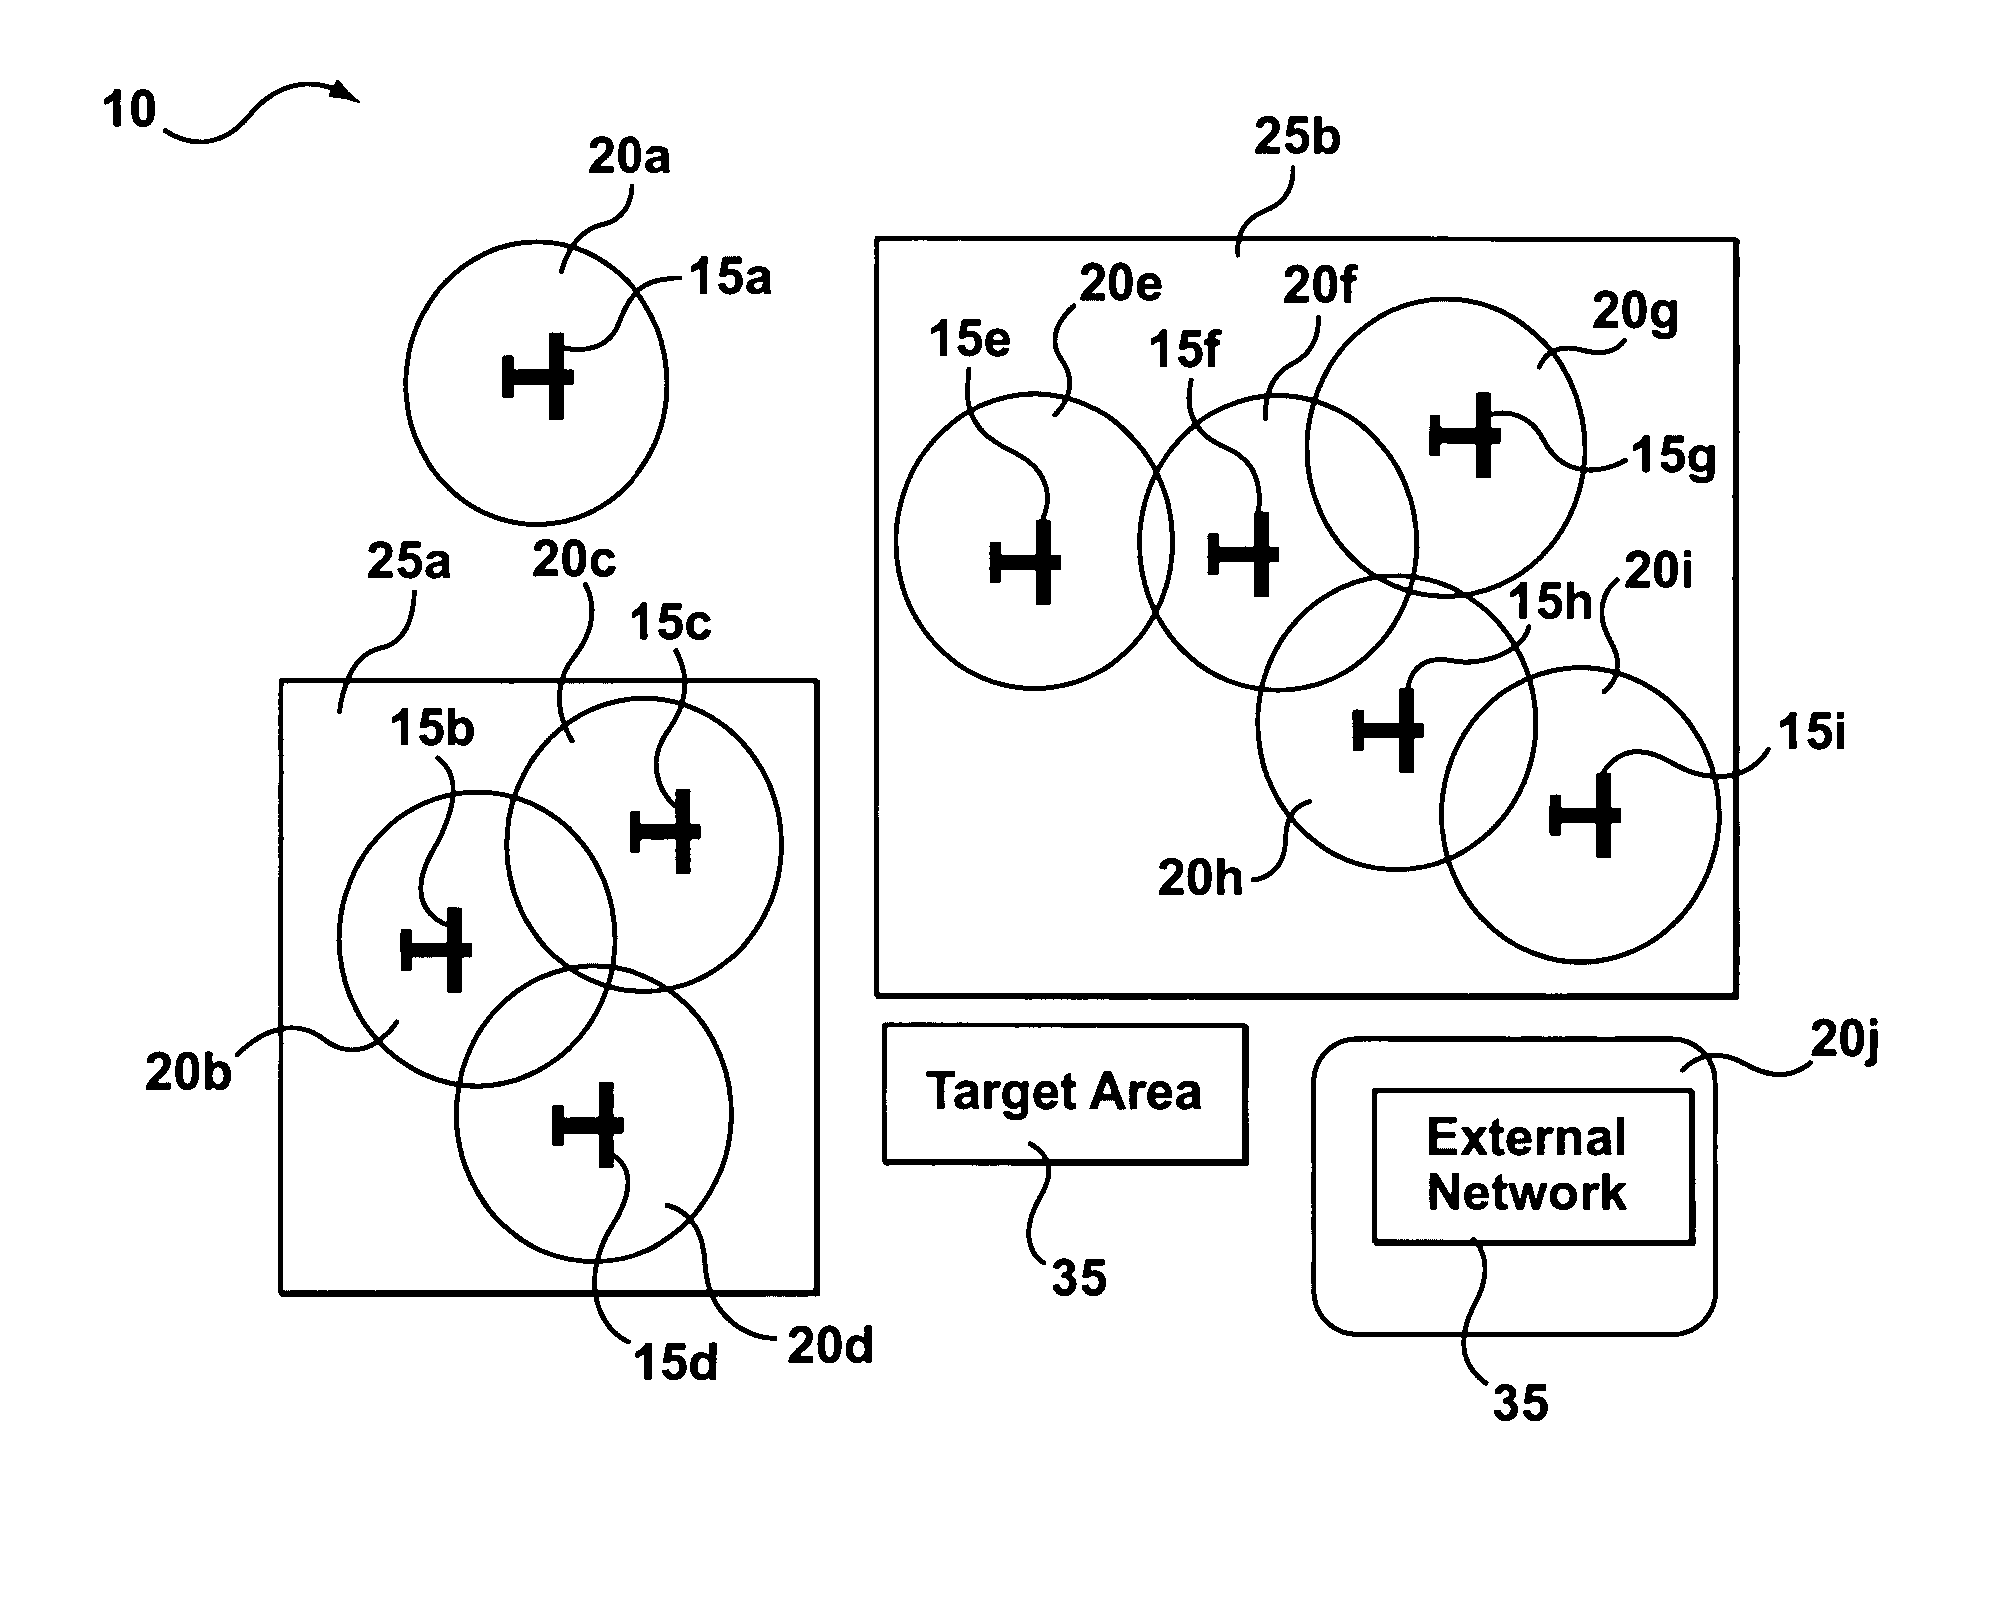 System and method for a mobile AD HOC network suitable for aircraft